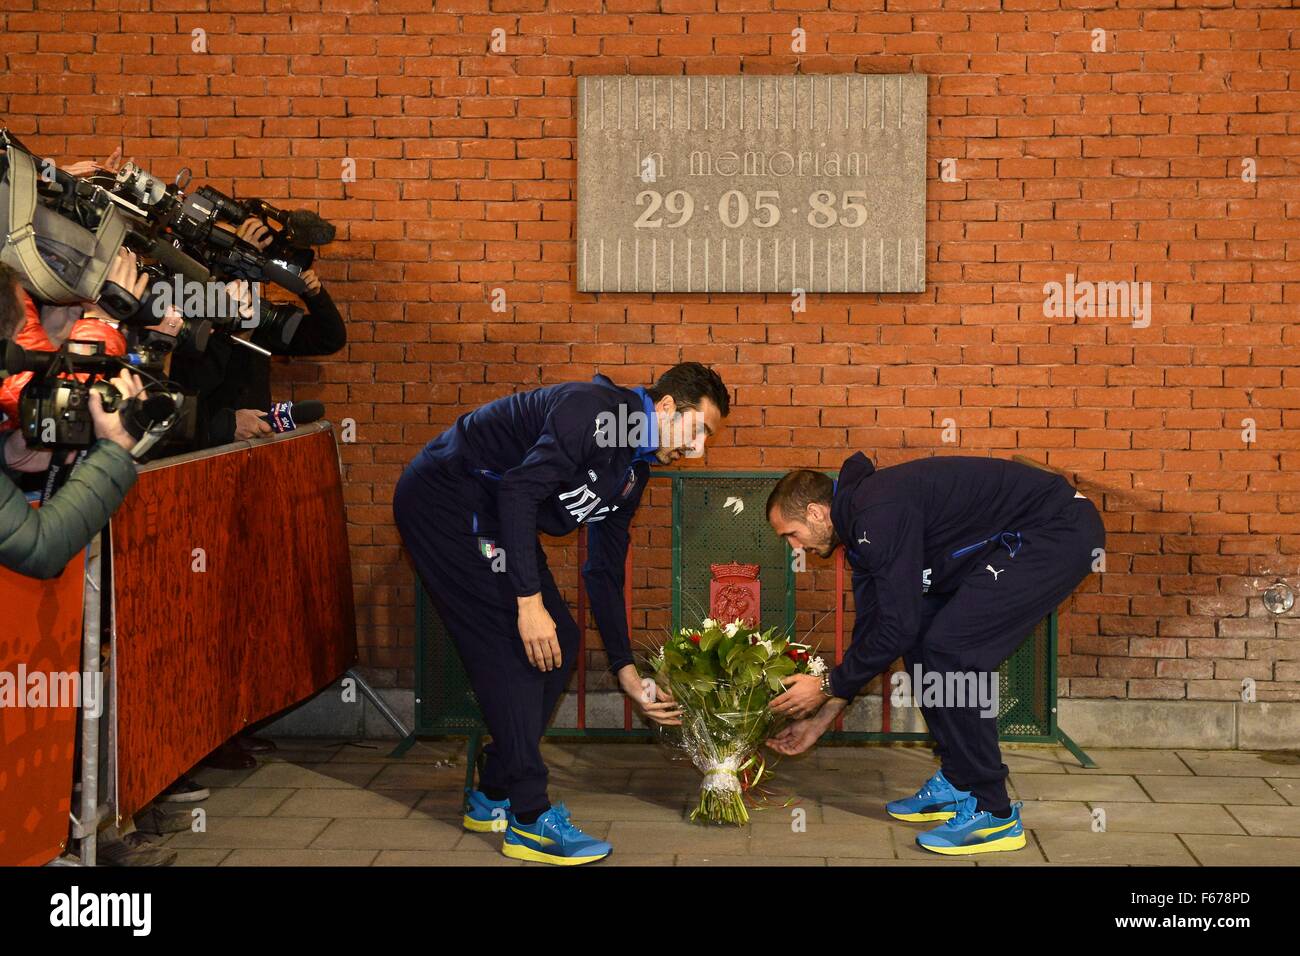 12.11.2015. King Baudouin Stadium (Formerly Heysel Stadium) Brussels, Belgium. The Juventus team visit the location where 39 fans from Liverpool and Juventus were killed during riots at the European cup final in May 1985 (30 years ago). Gianluigi Buffon and Giorgio Chiellini lay a wreath Stock Photo